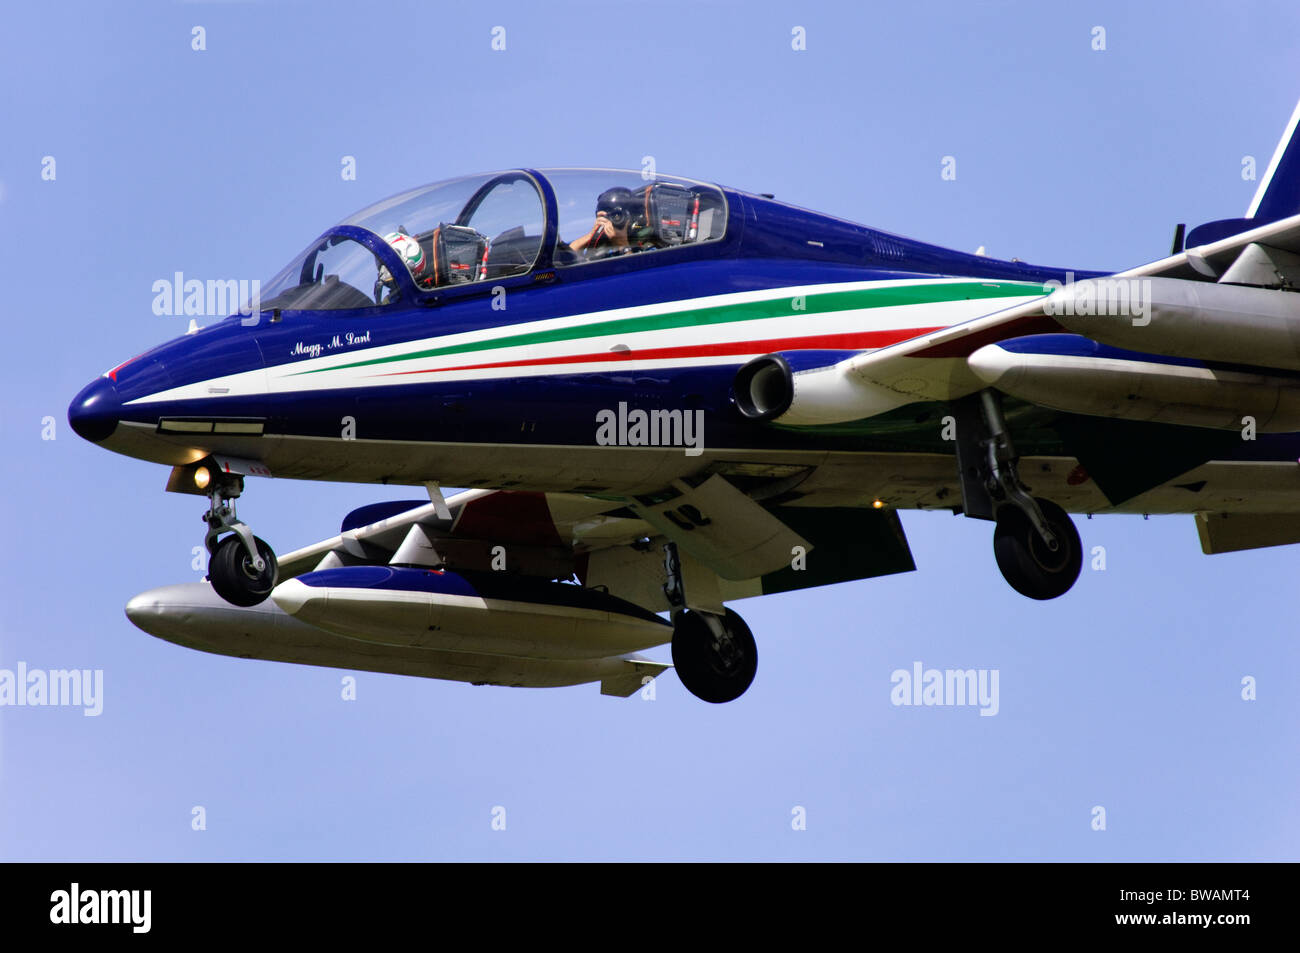 Aermacchi MB-346 of the Italian Frecce Tricolori display team on approach for landing at Fairford RIAT Stock Photo